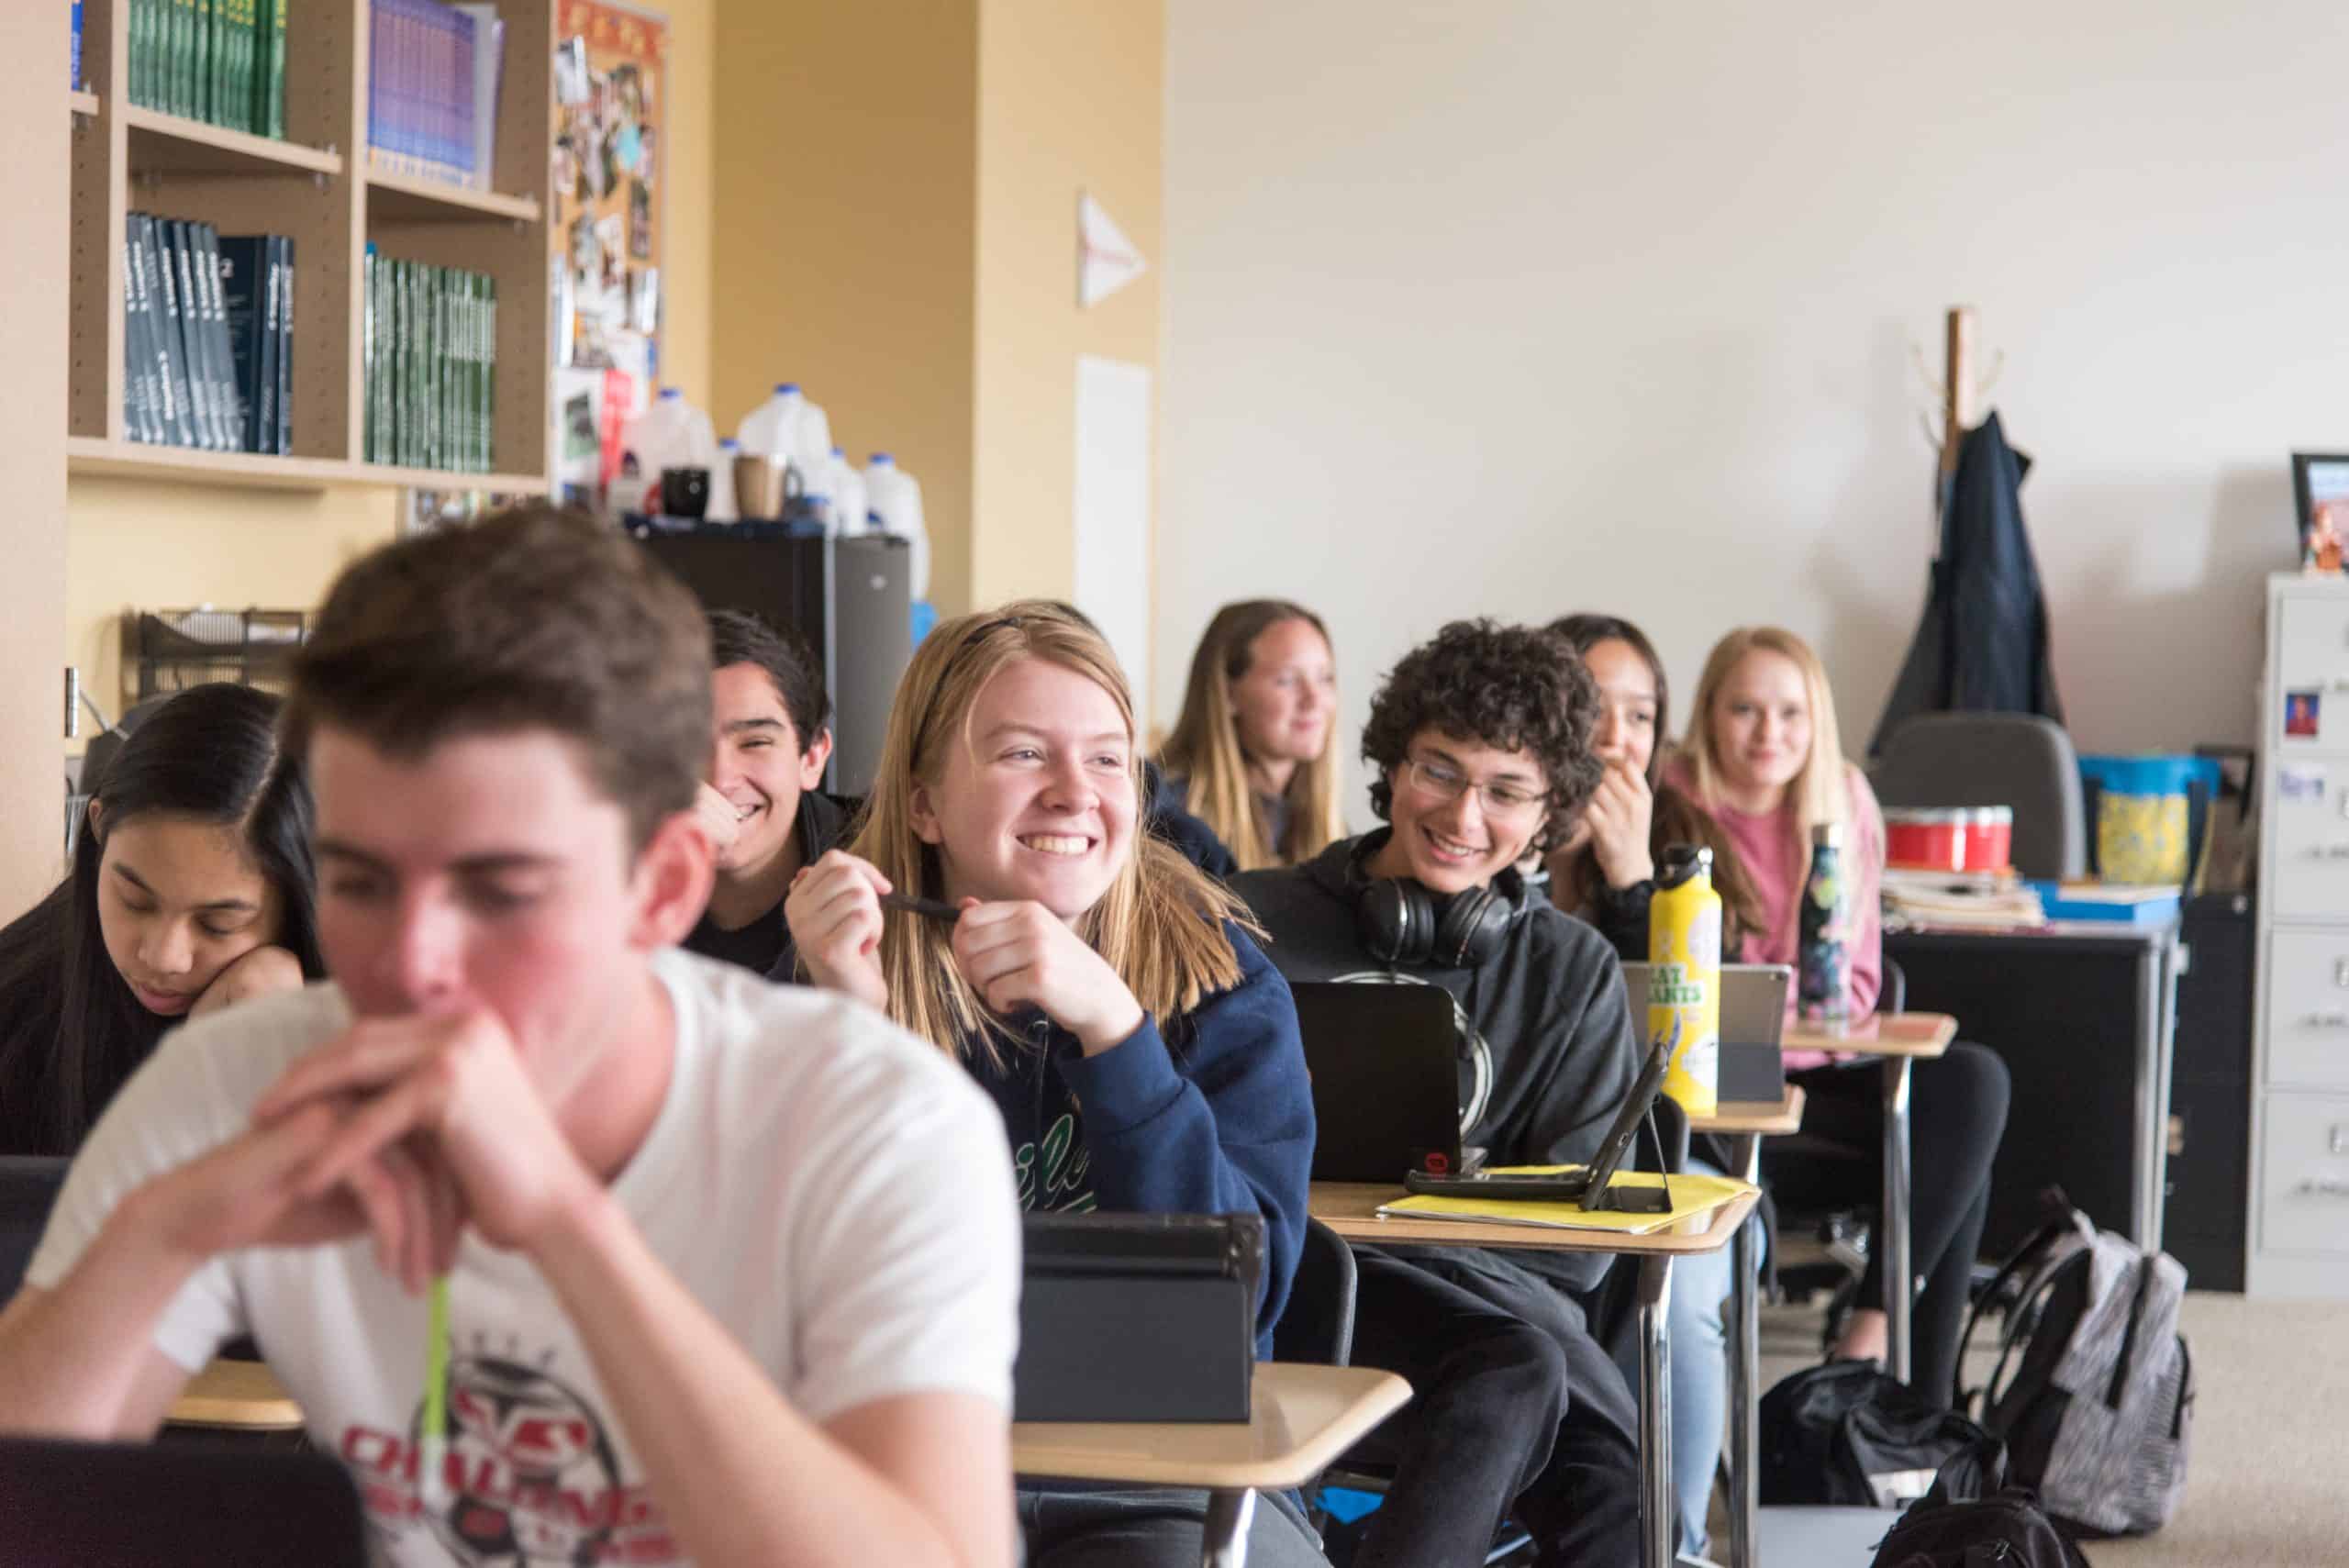 Group of students in classroom smiling